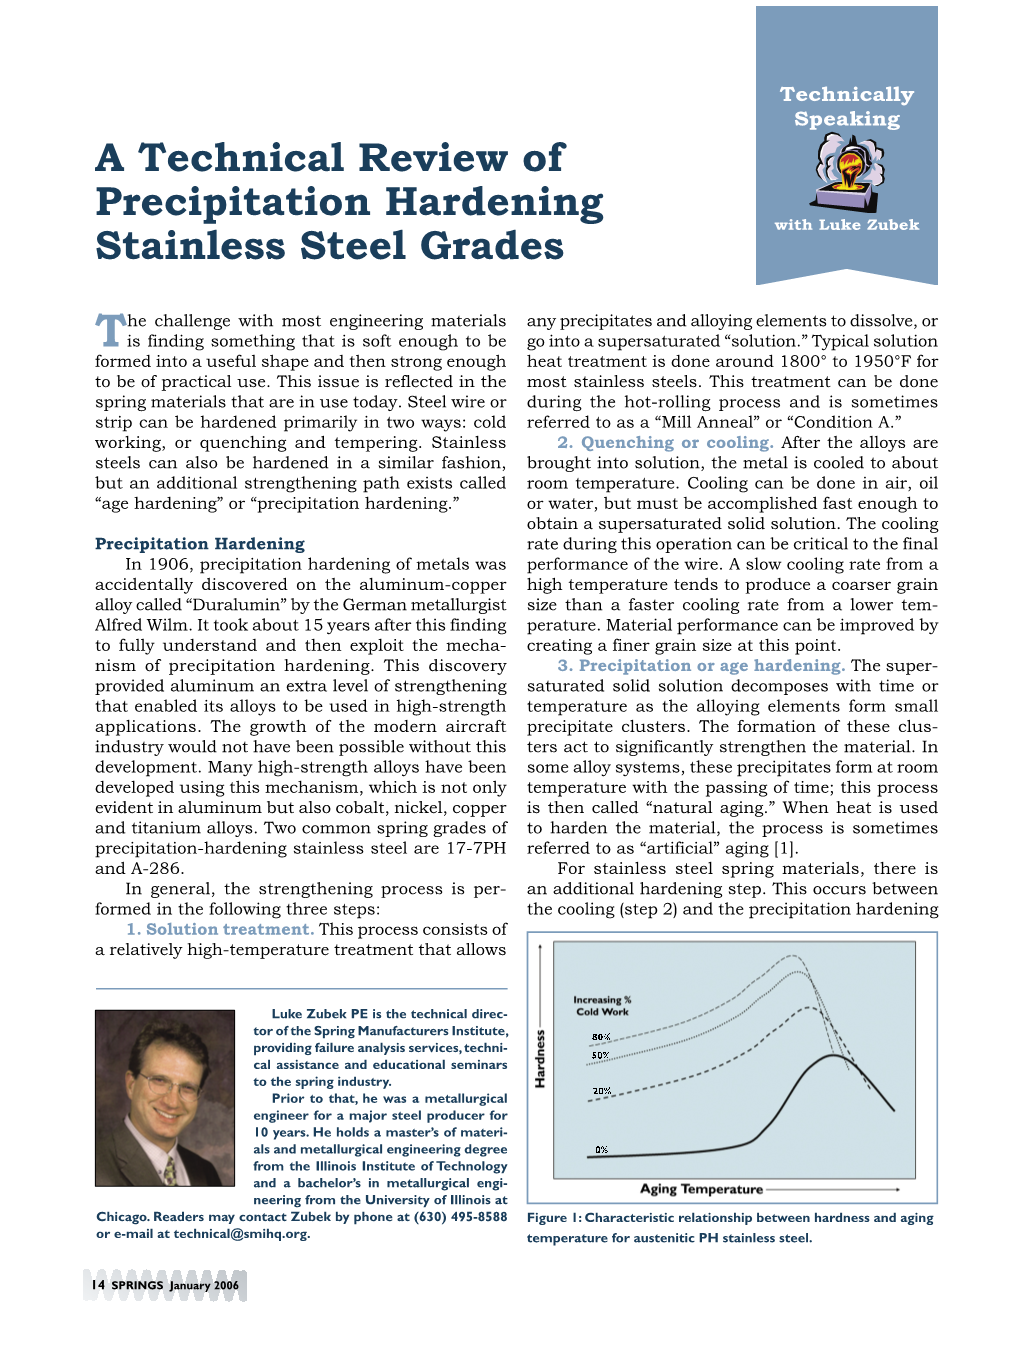 A Technical Review of Precipitation Hardening Stainless Steel Grades